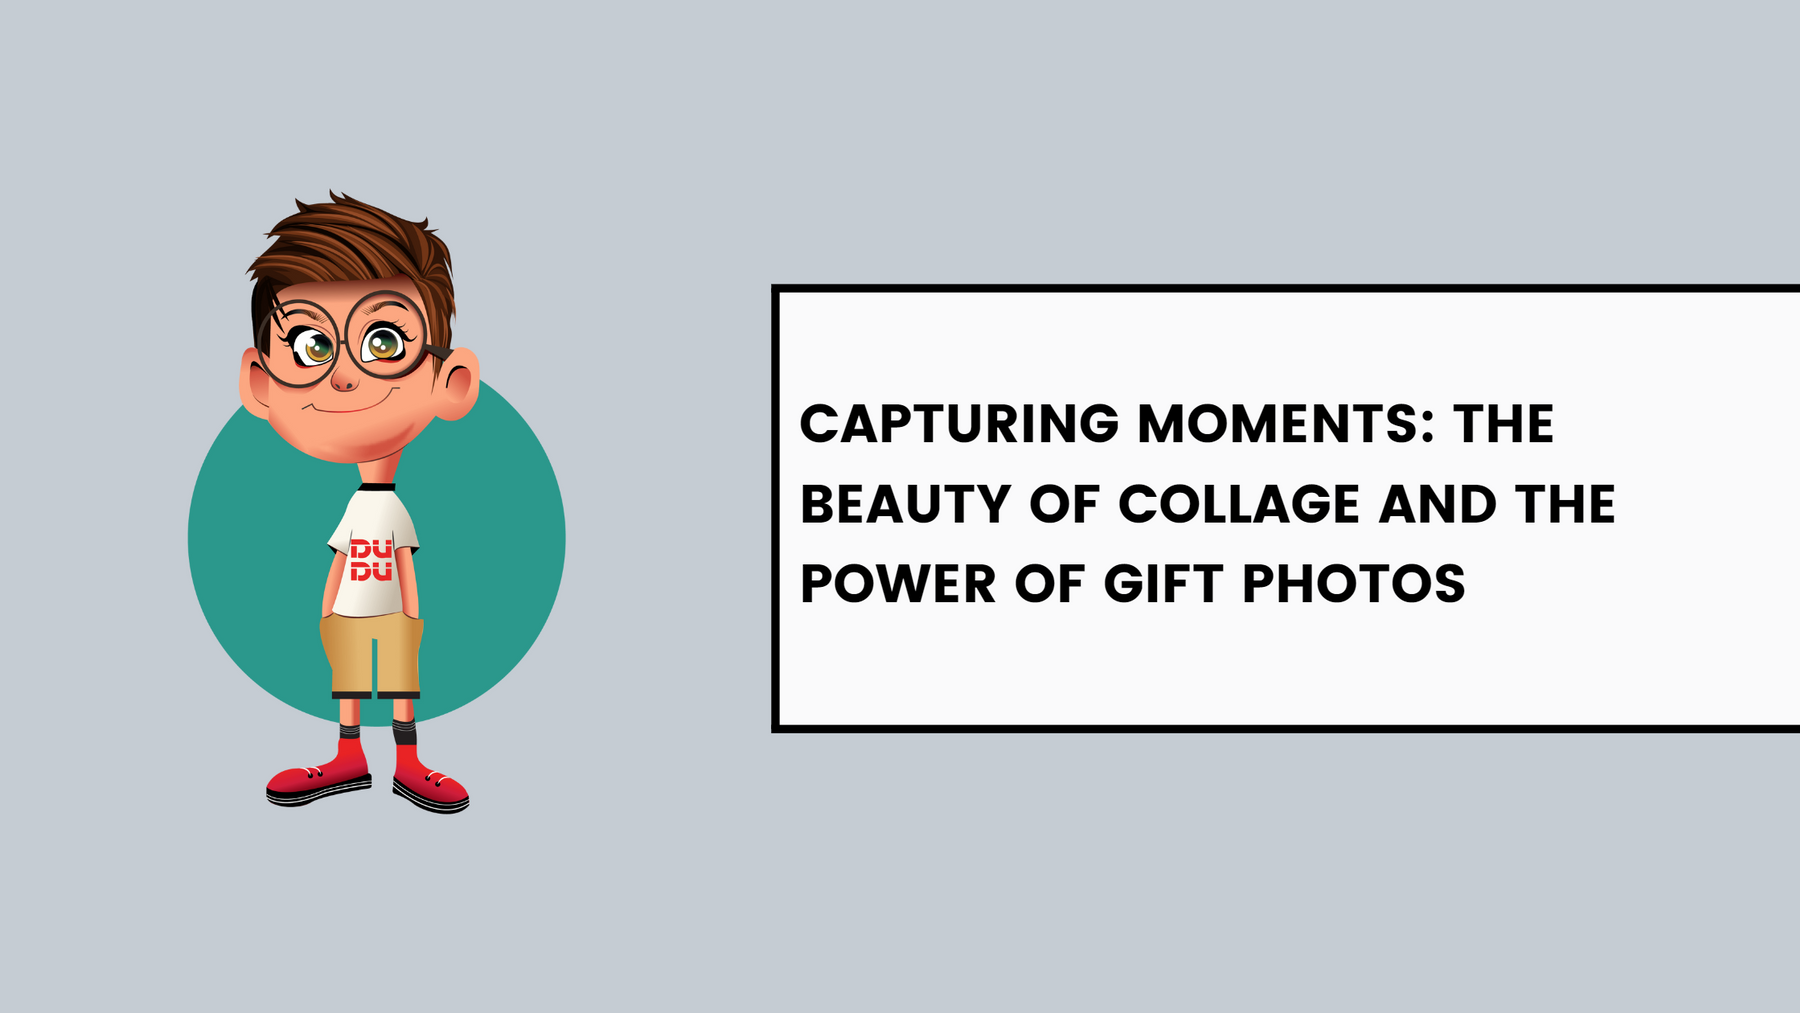 Capturing Moments: The Beauty of Collage and the Power of Gift Photos